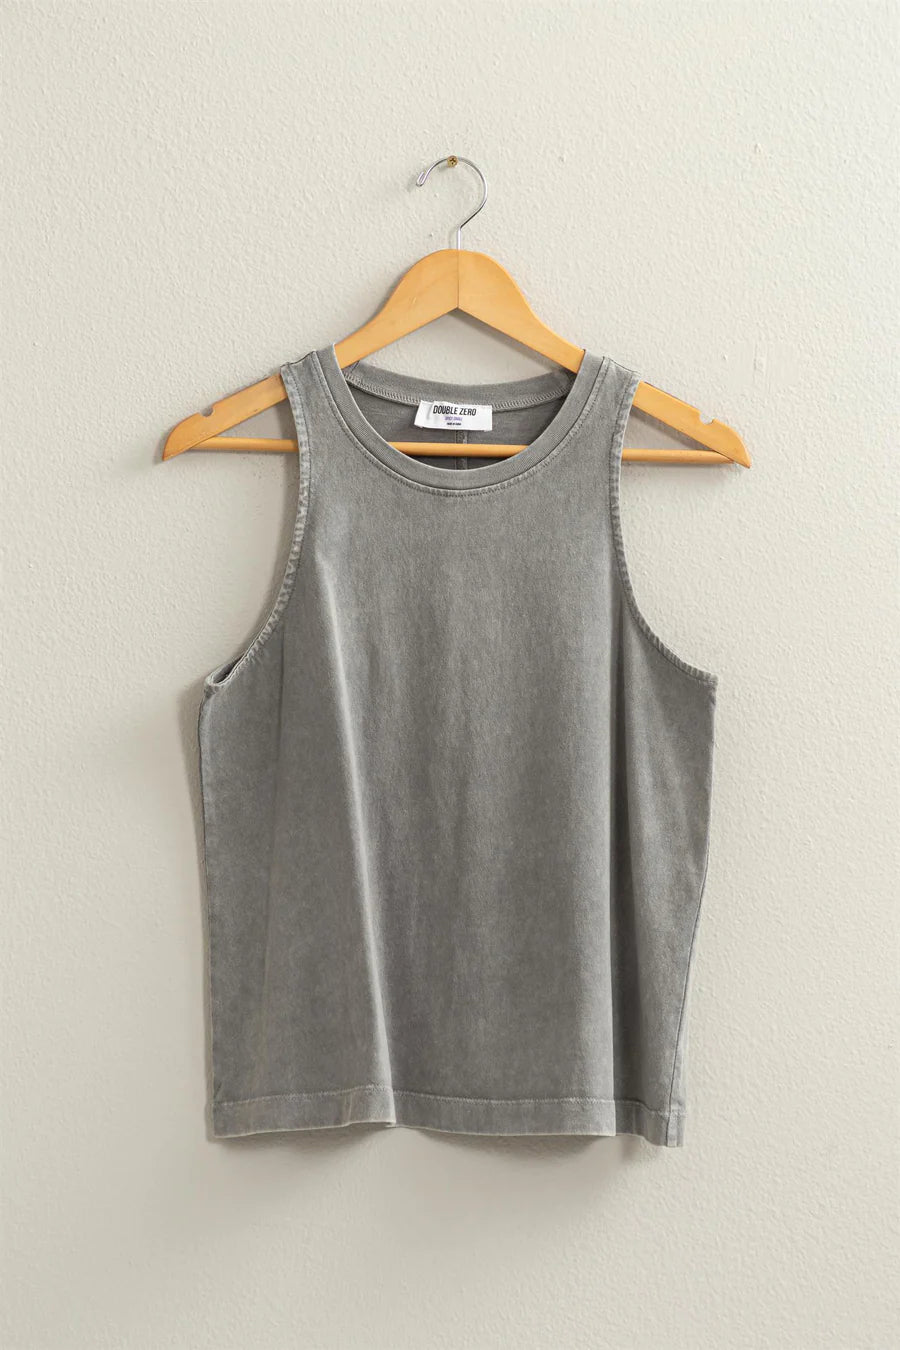 HYFVE INC. Women's Top GREY / S Mineral Washed Sleeveless Top || David's Clothing DZ24A856